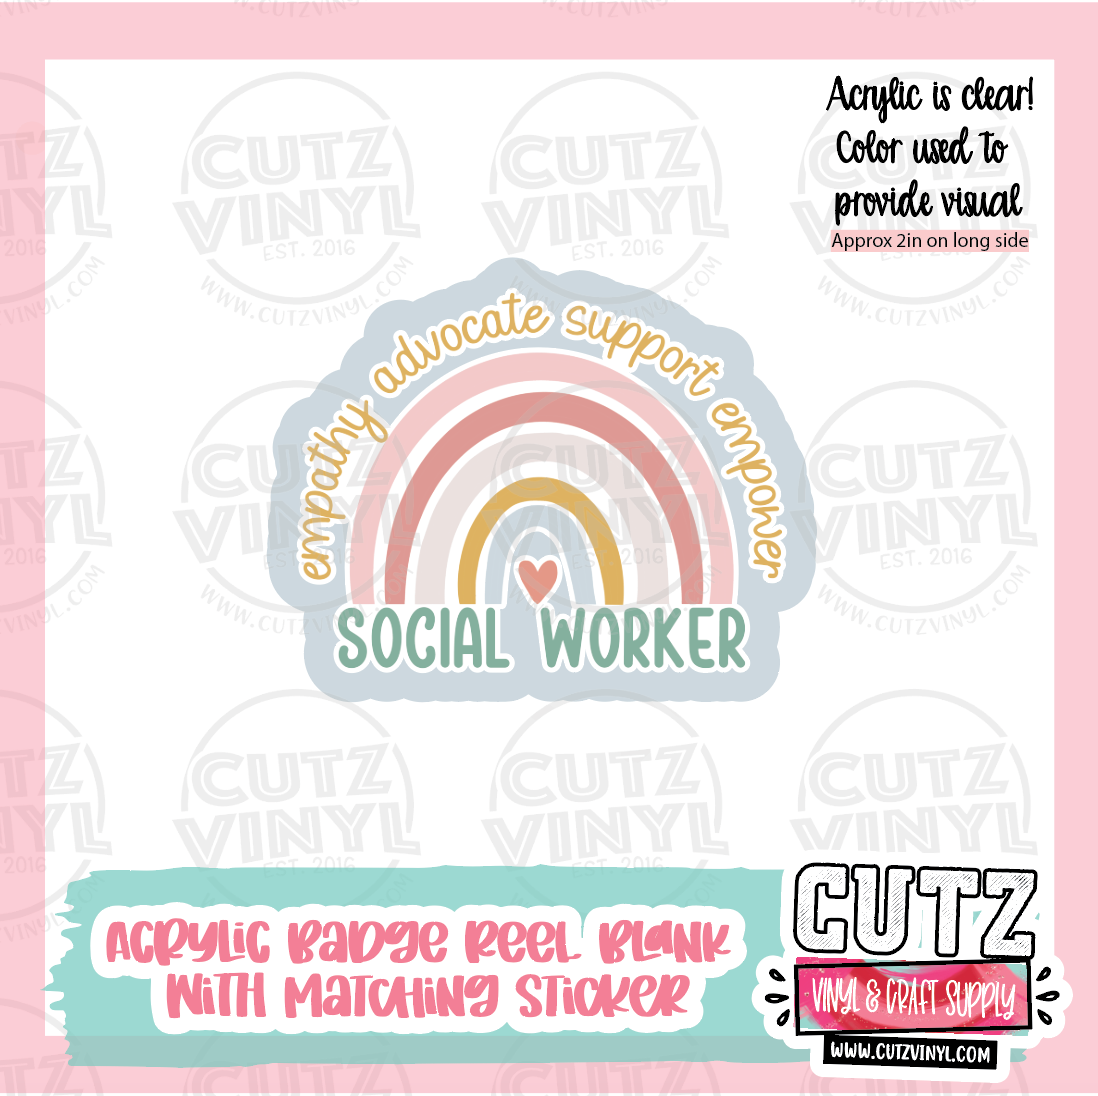 Rainbow Social Worker - Acrylic Badge Reel Blank and Matching Sticker